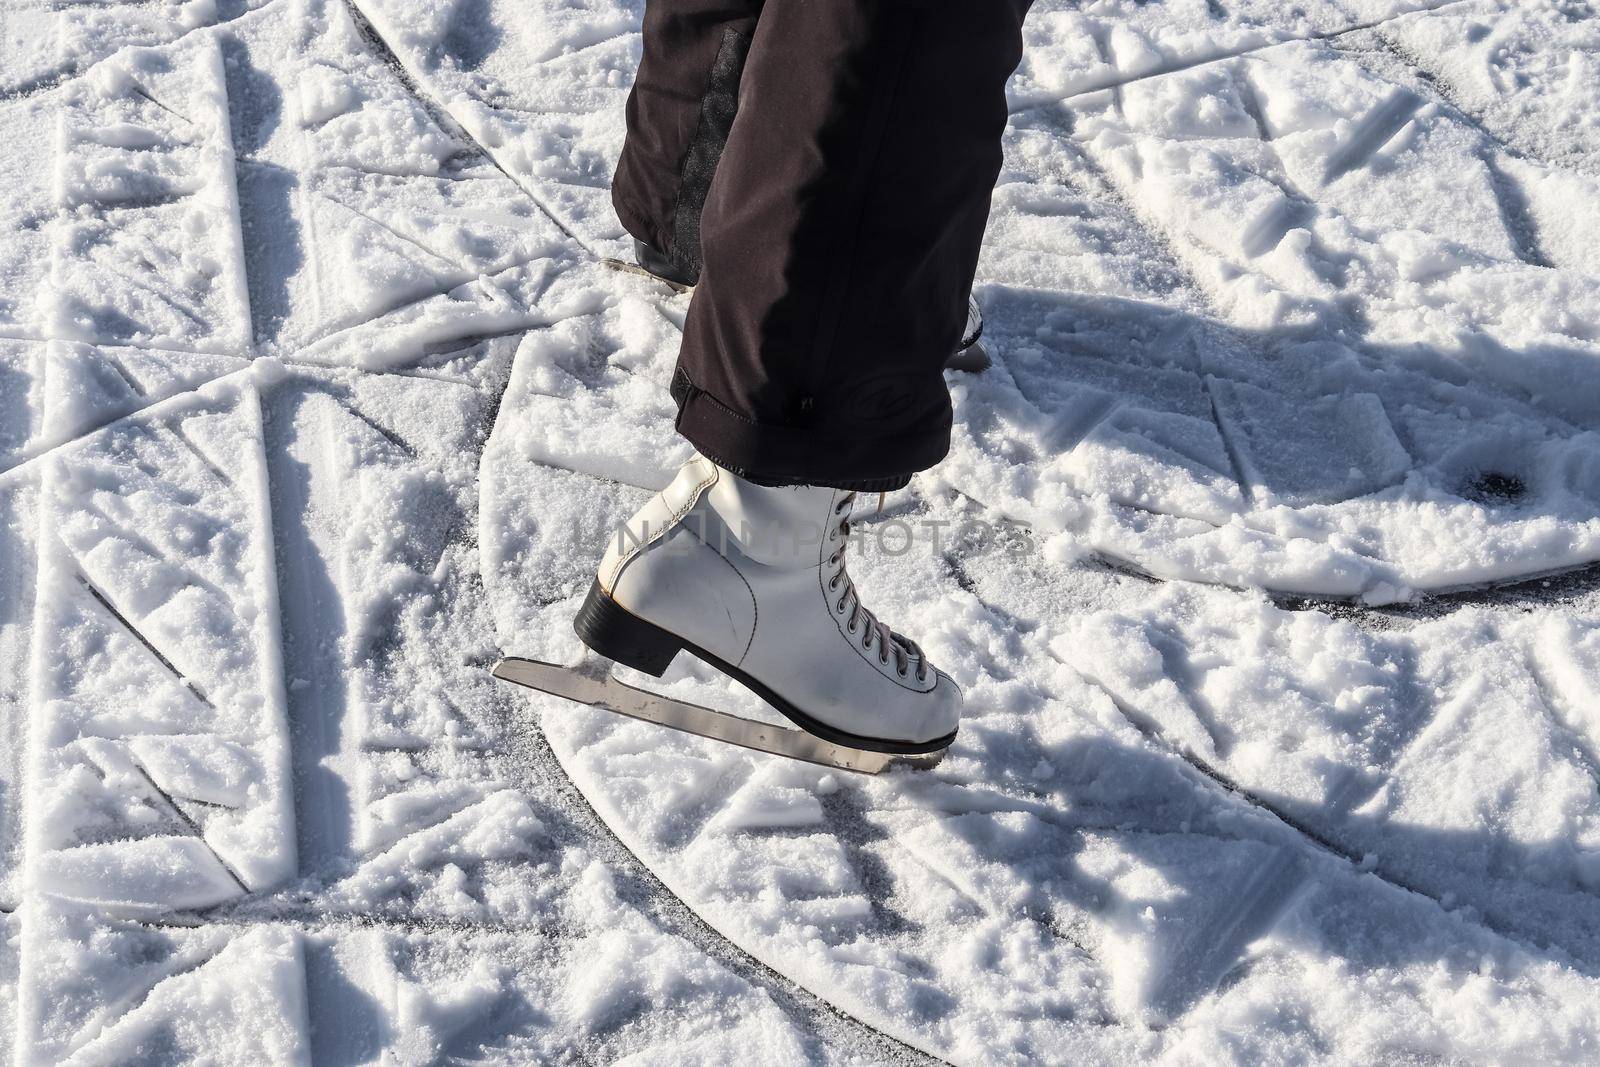 Close up on womans feet wearing ice skating boots and standing on ice. by MP_foto71